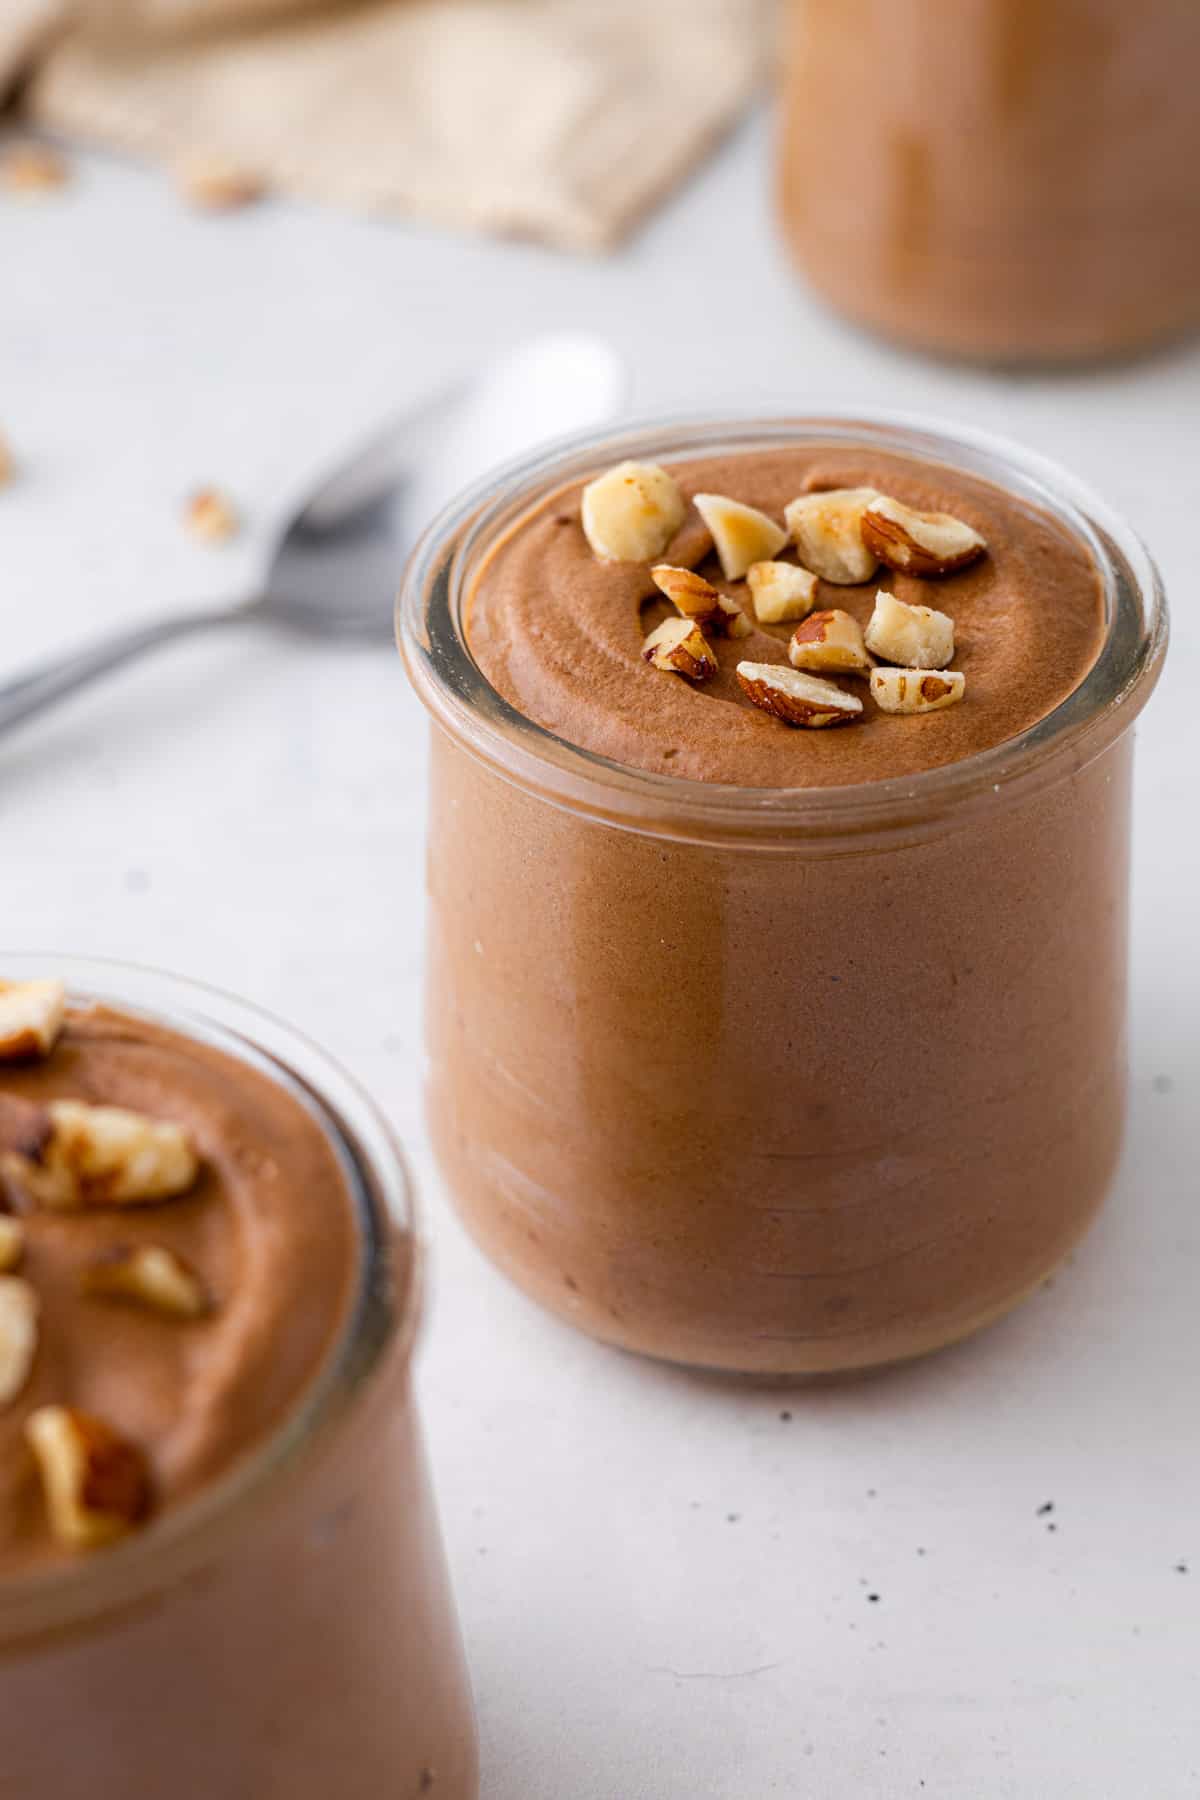 A jar of mousse with hazelnuts.